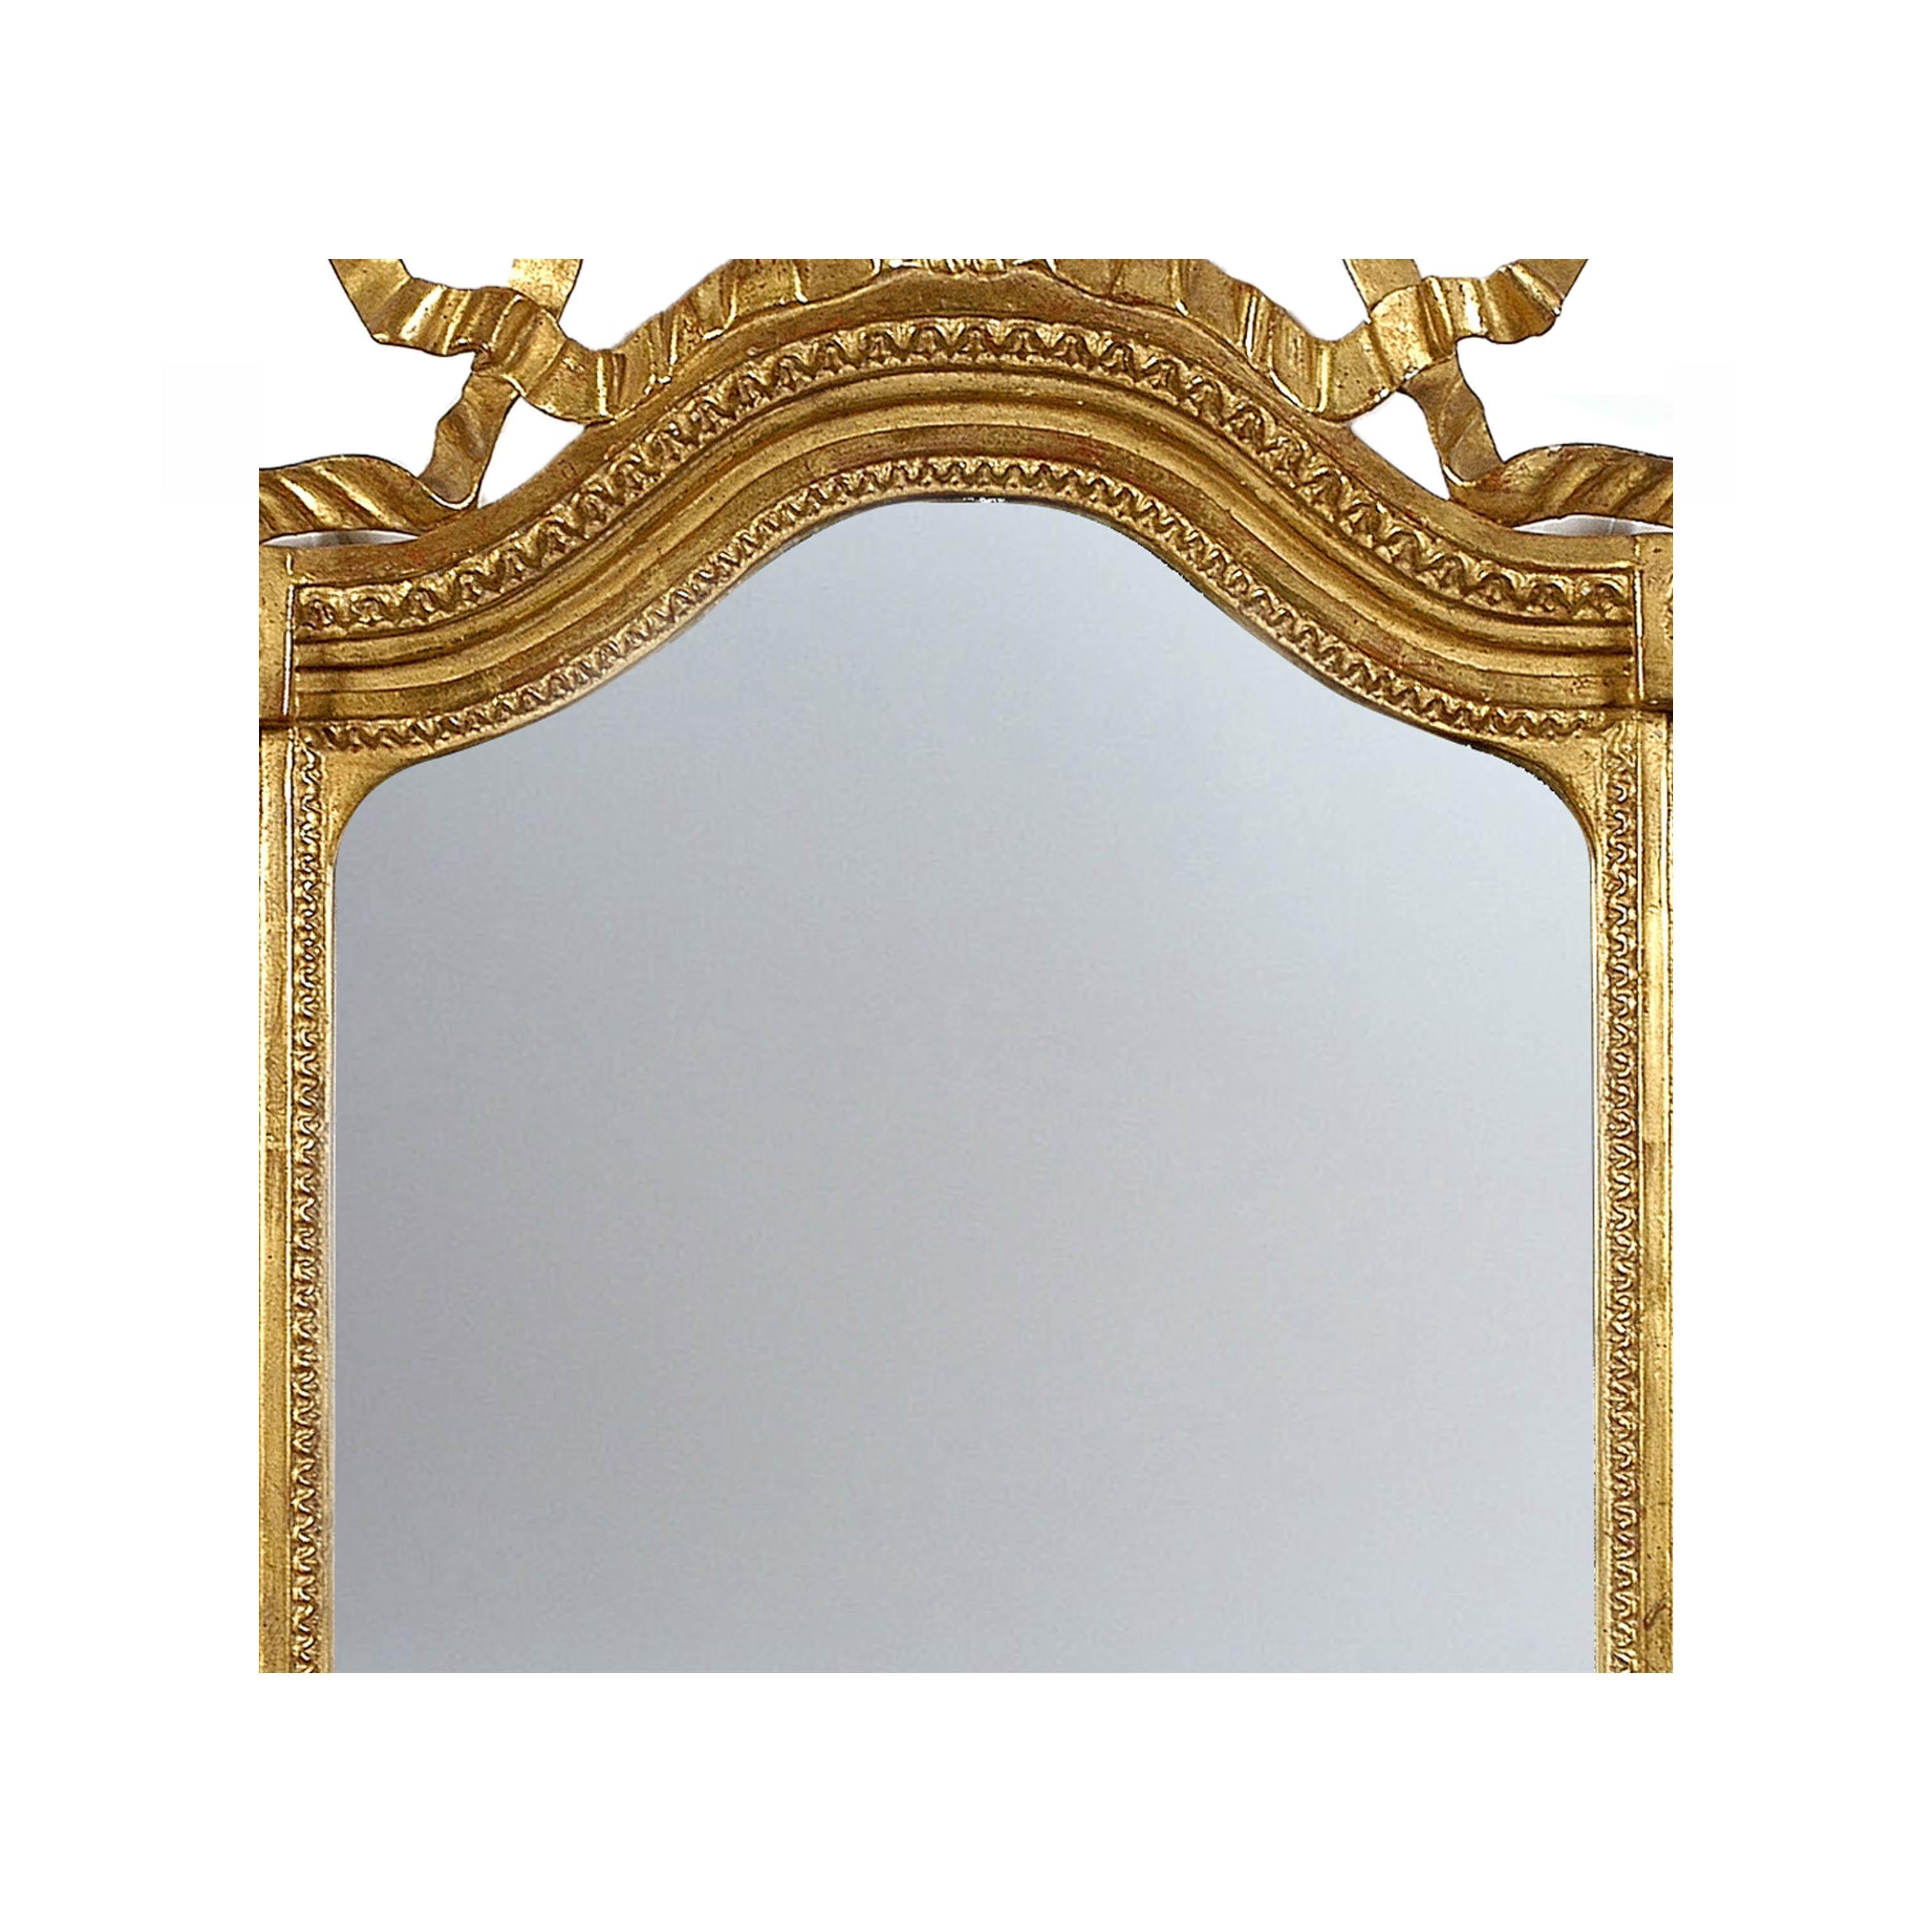 Spanish Neoclassical Regency Style Gold Foil Hand Carved Wooden Mirror, 1970